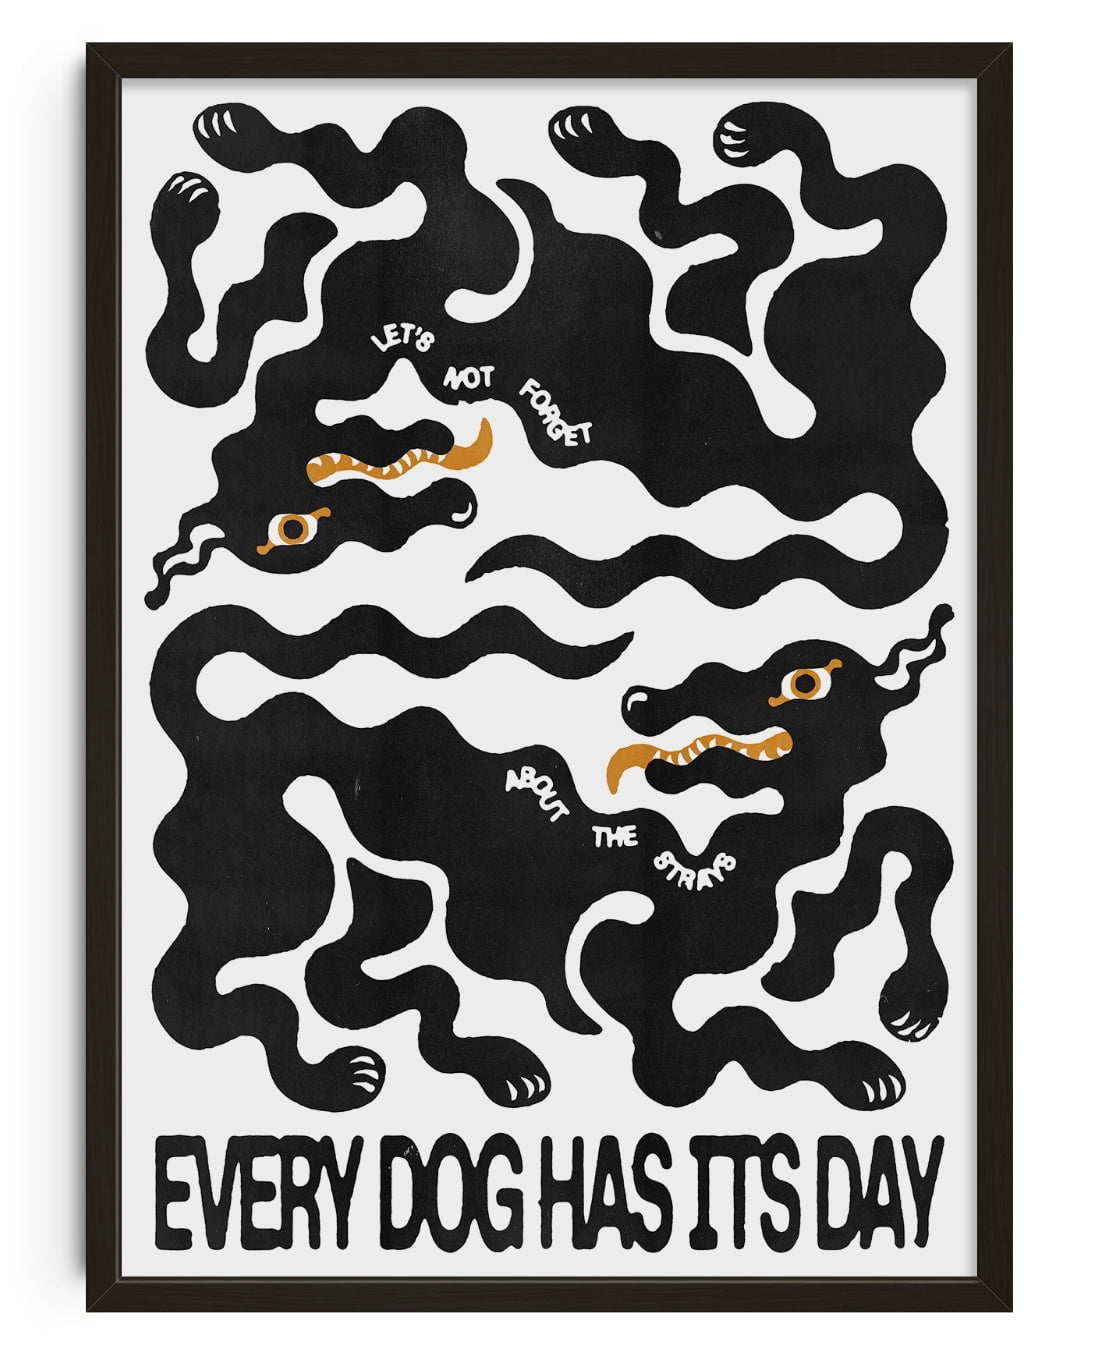 11.7x16.5" (A3) Every Dog - UNFRAMED contemporary wall art print by Alexander Khabbazi - sold by DROOL